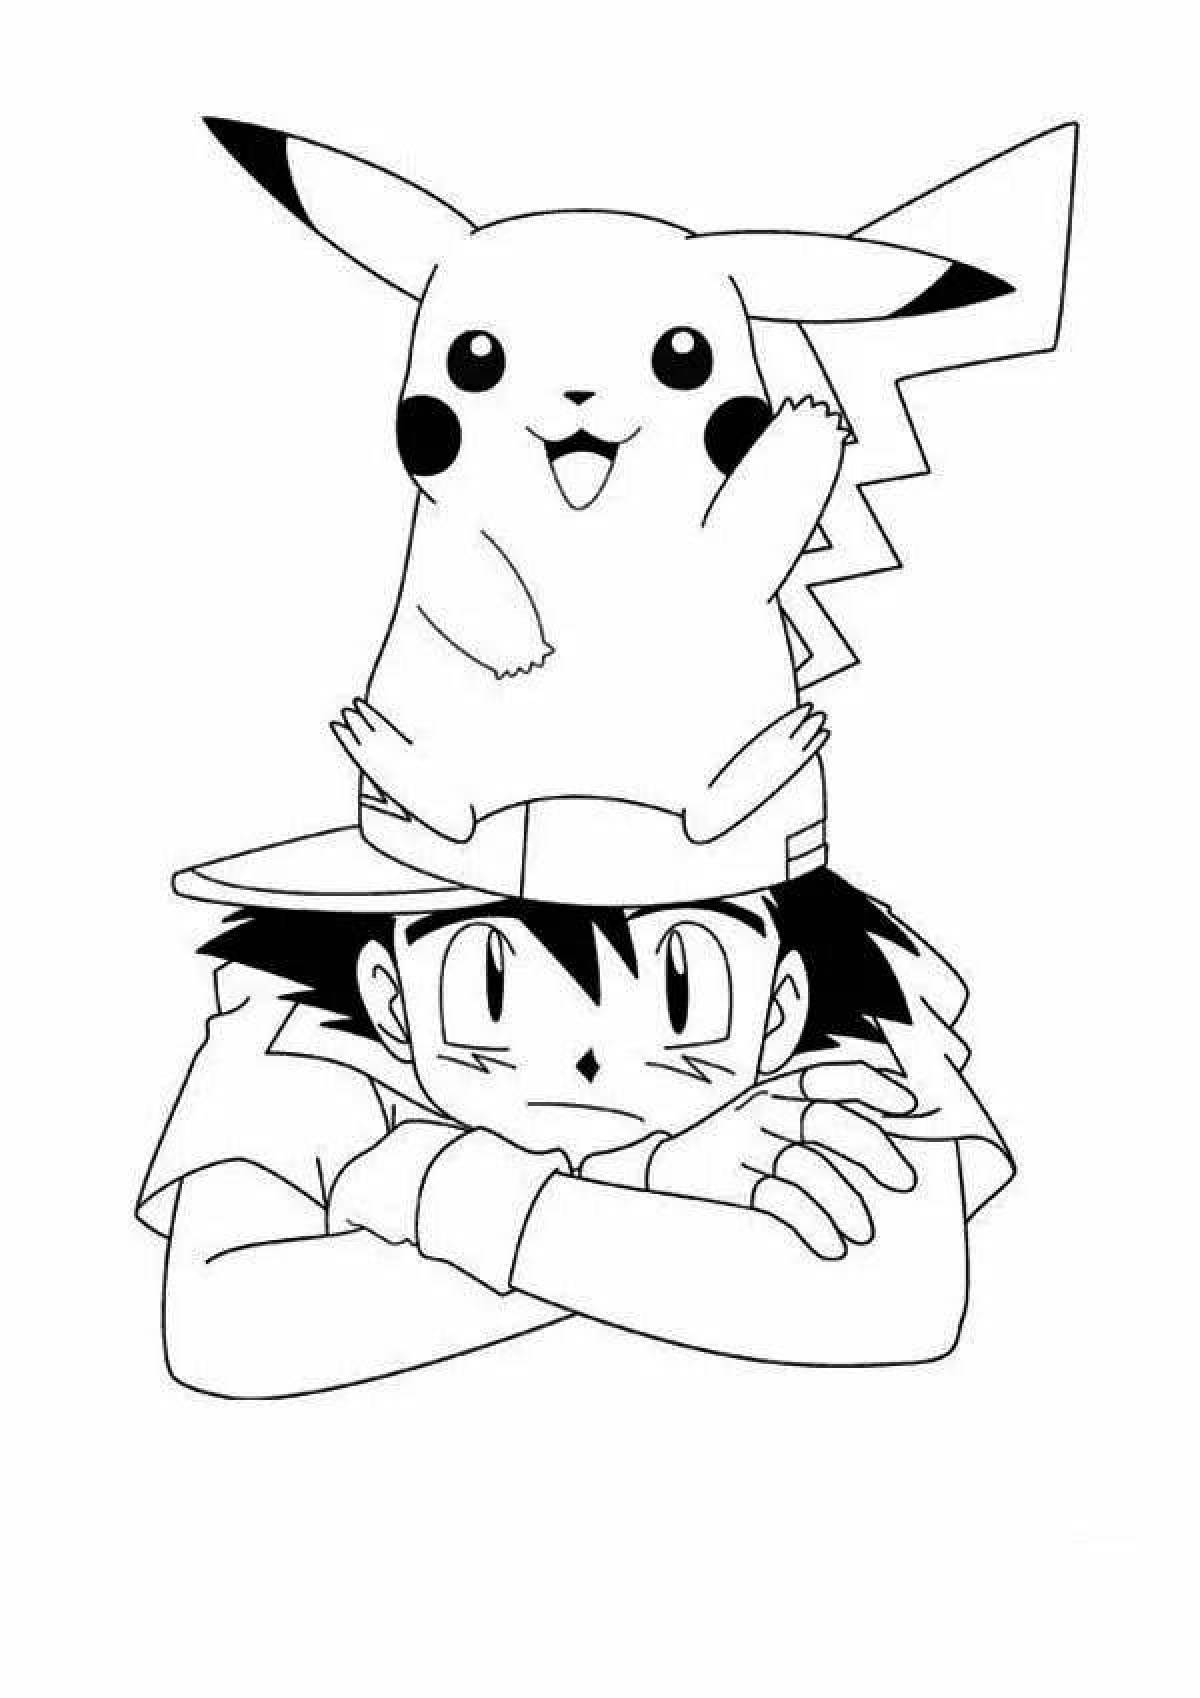 Exquisite pikachu anime coloring book